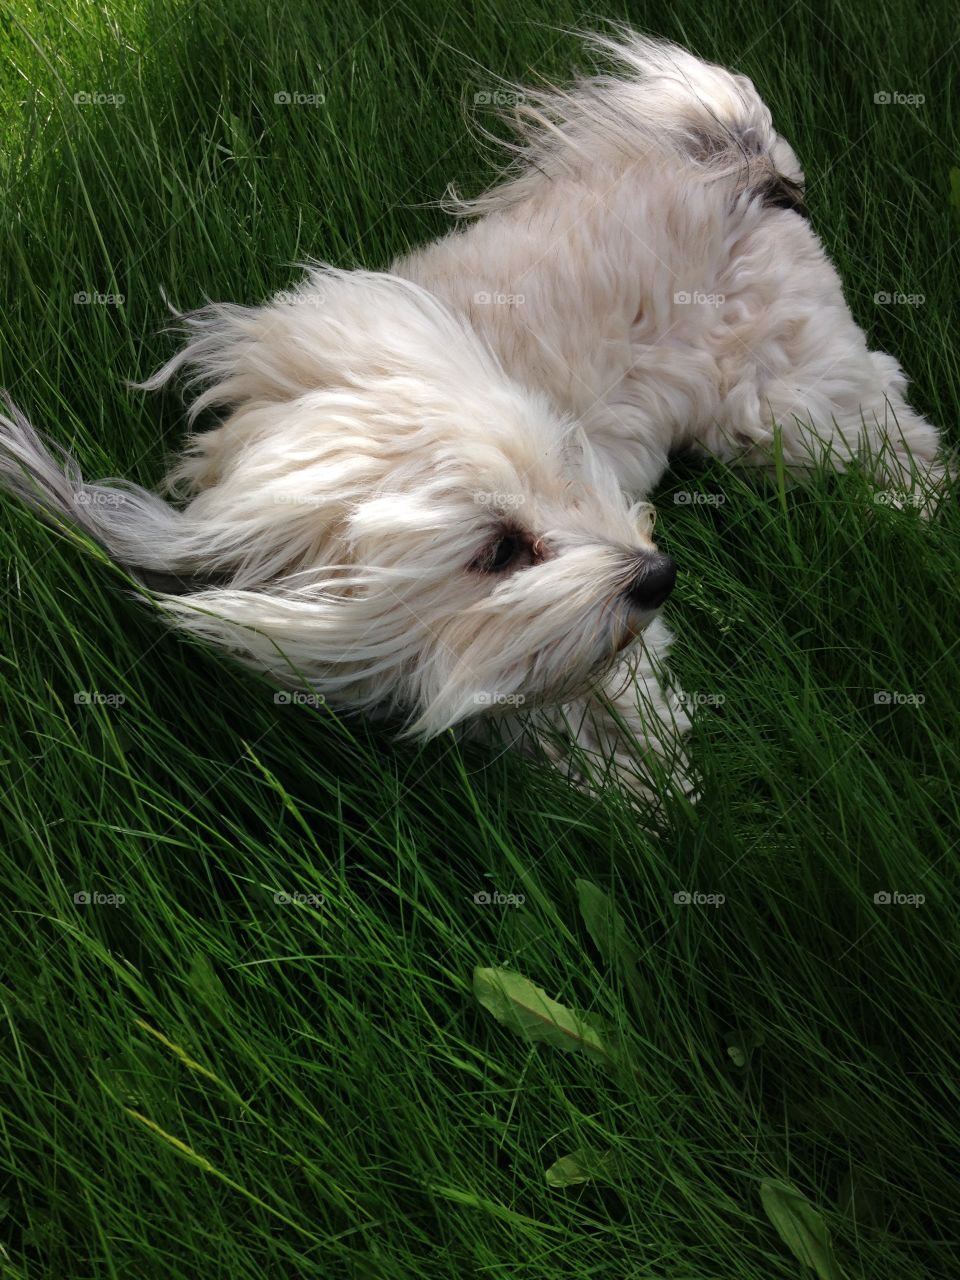 Dog in The grass
